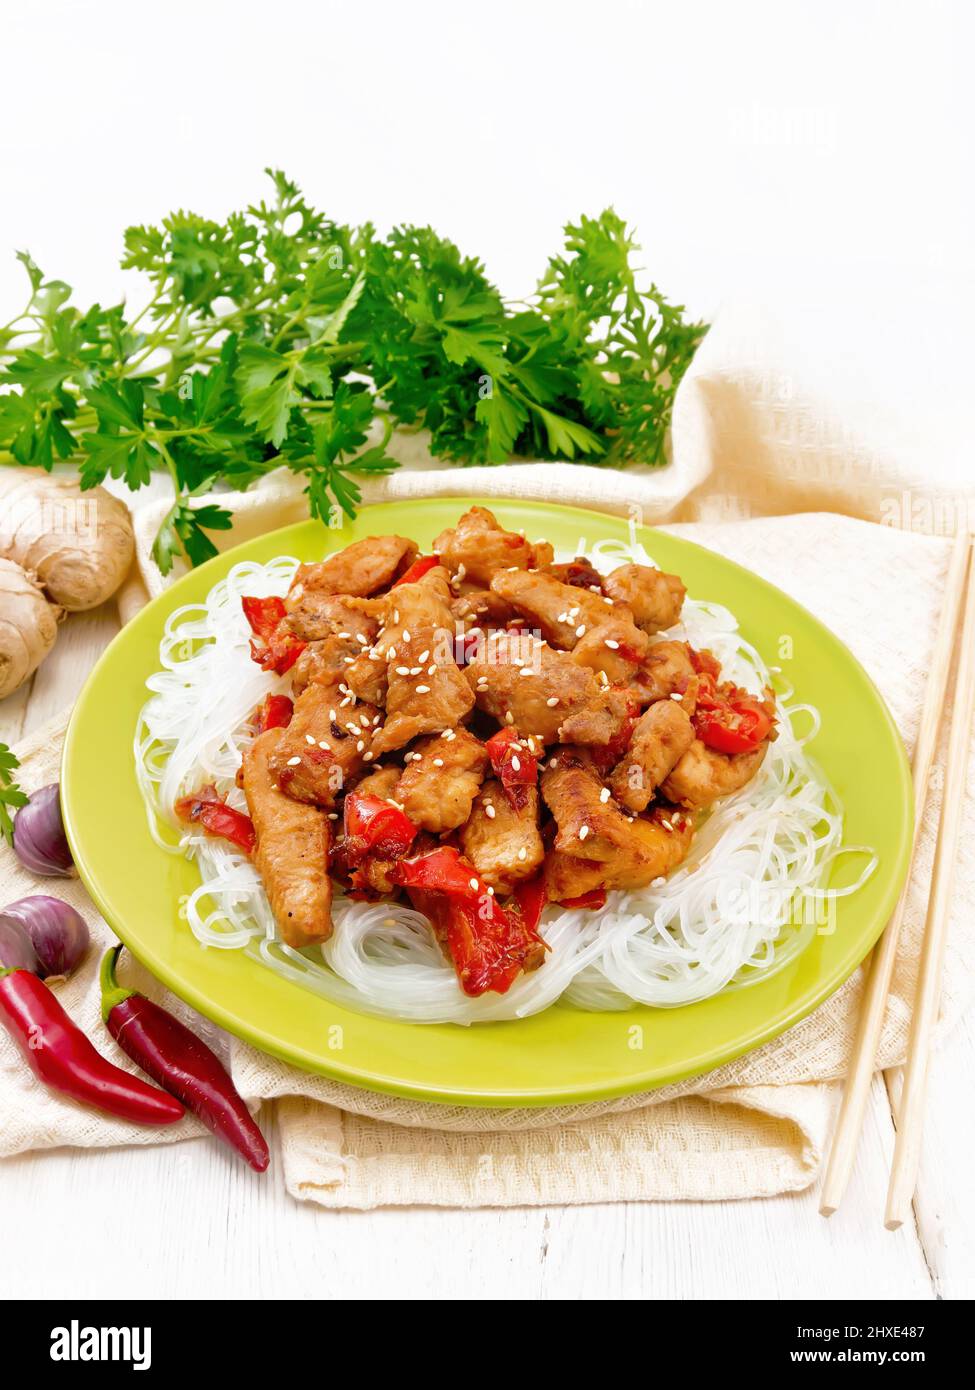 Stir-fry chicken with pepper, garlic, ginger and soy sauce, sprinkled with sesame seeds in a plate, napkin and parsley on a wooden board background Stock Photo